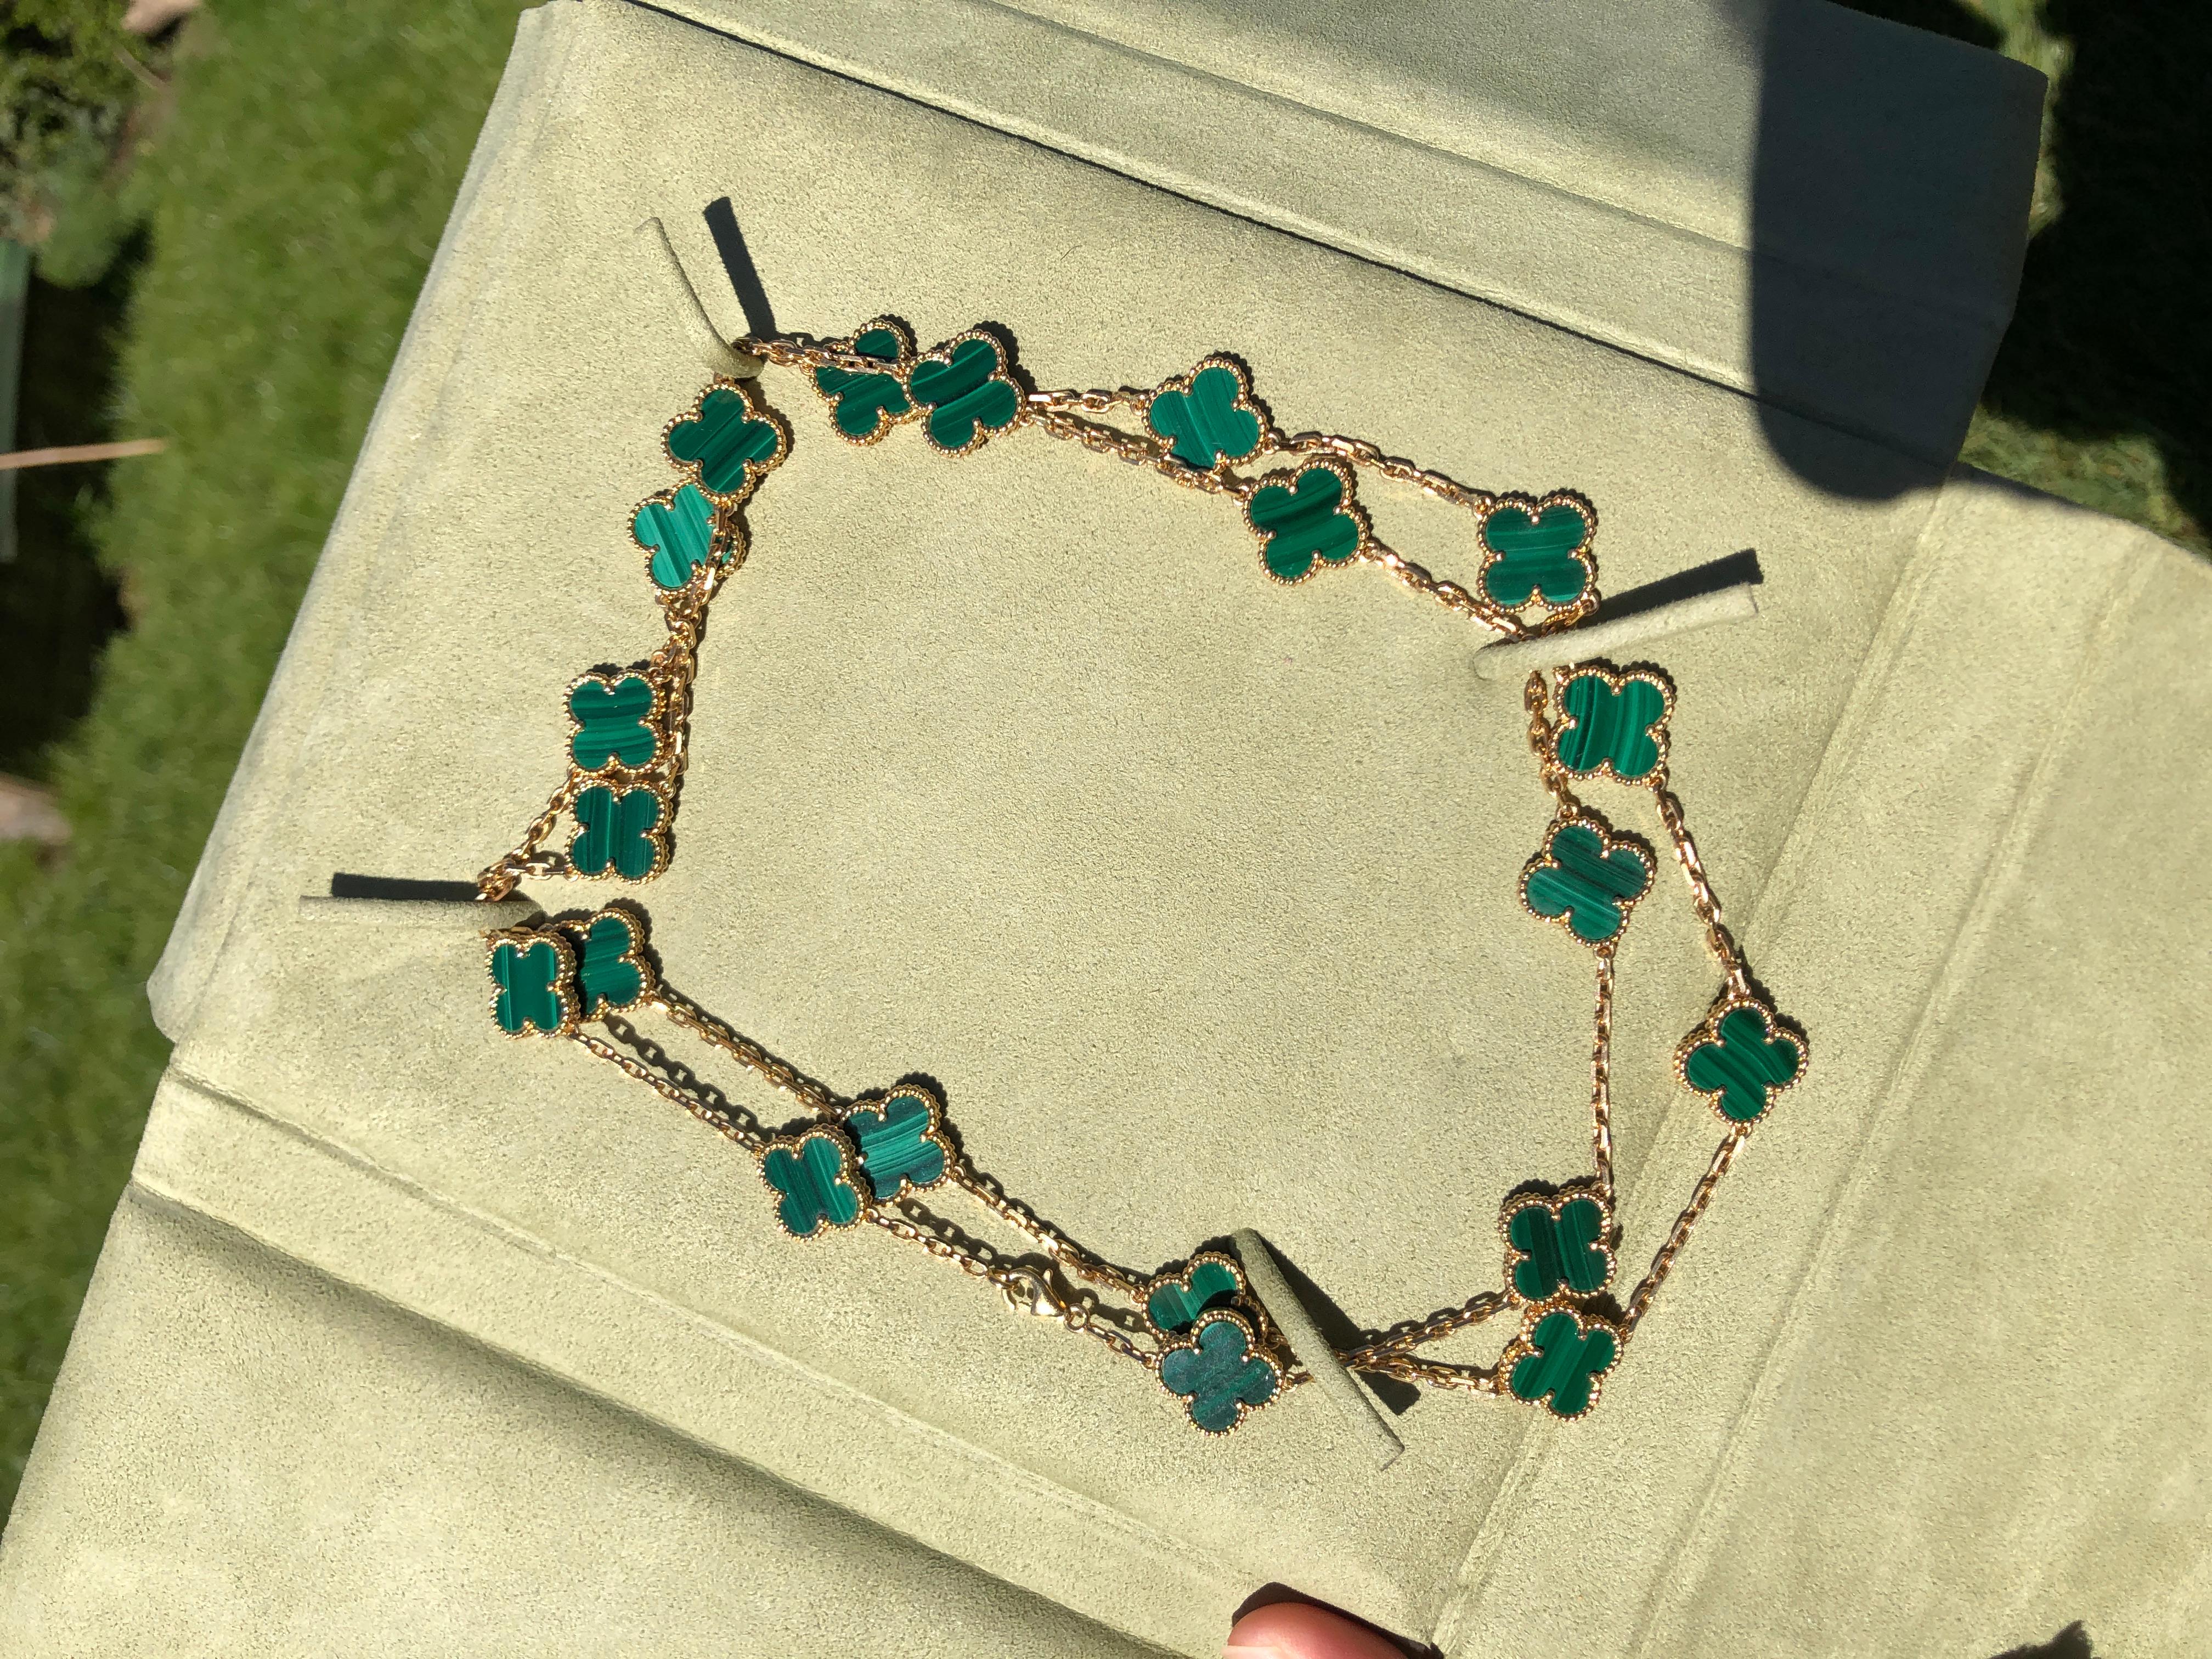 18k Yellow Gold Alhambra 20 Motifs Malachite Necklace by Van Cleef & Arpels was made in 2014. With 20 motifs of Malachite Alhambra stones 15mm each. 

This necklace comes with VCA original pouch. Retail Price: £15000

Every piece we sell is 100%